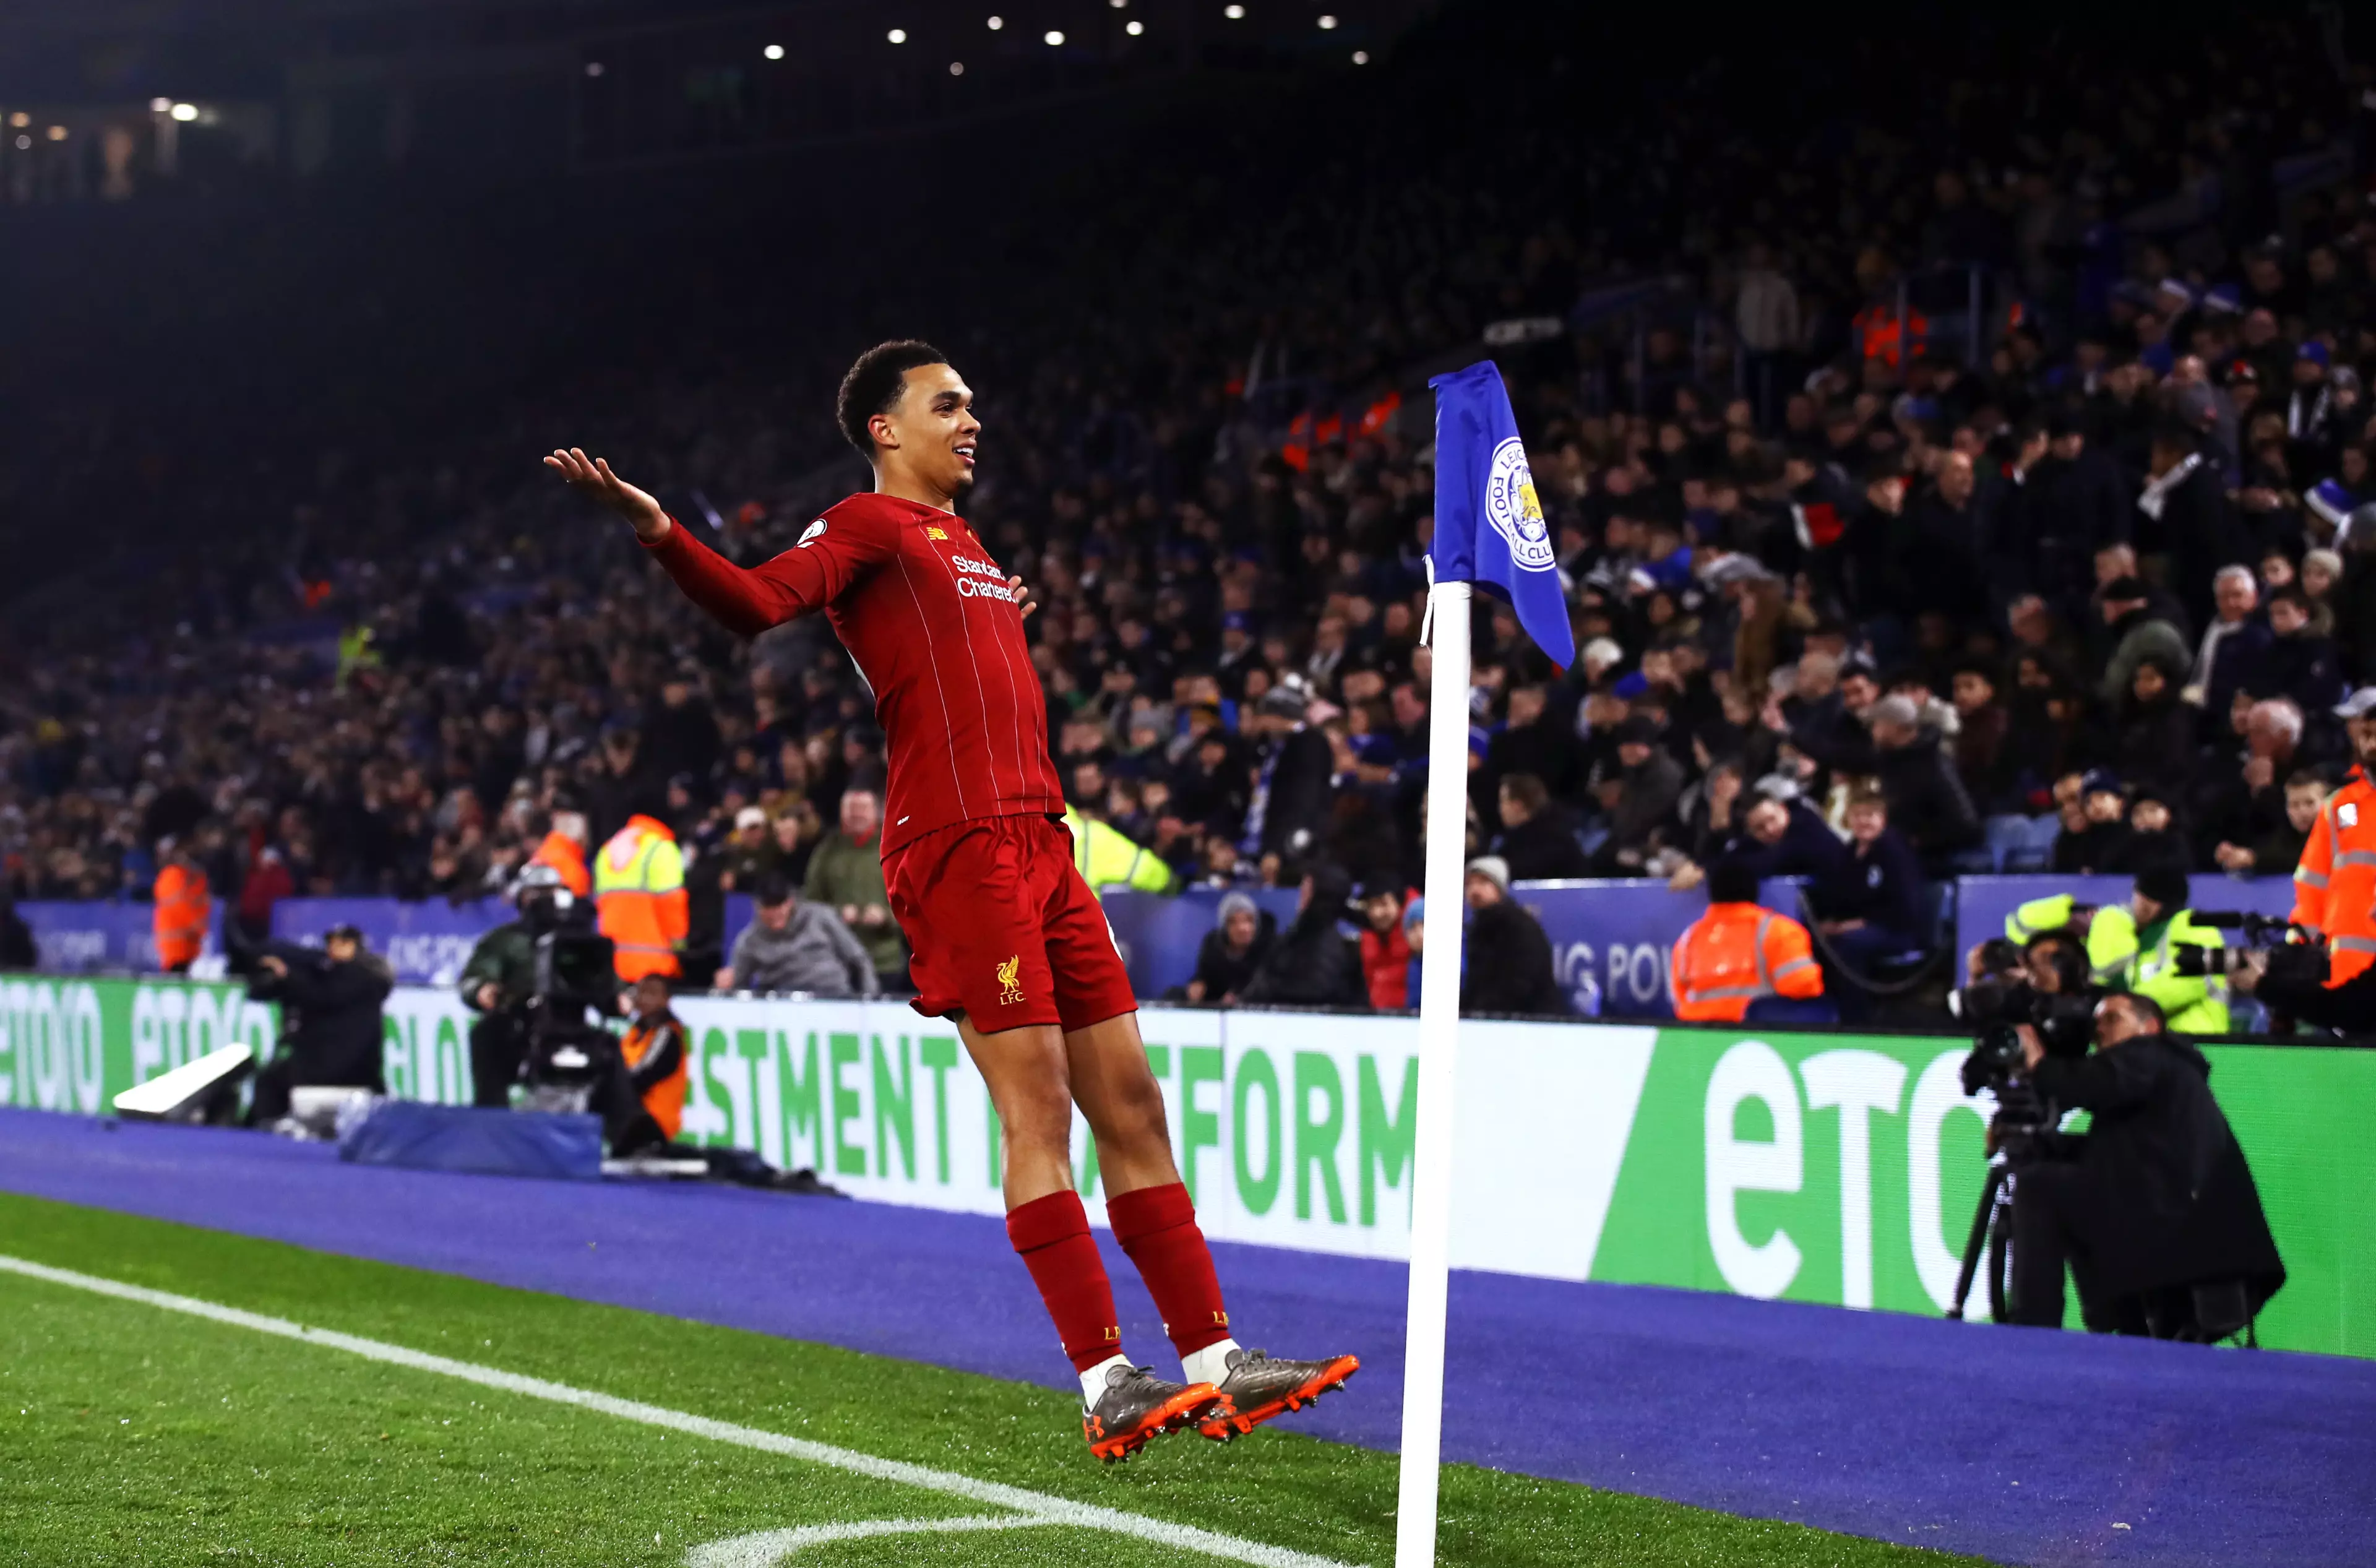 Trent Alexander-Arnold put on a masterclass as Liverpool thrashed Leicester